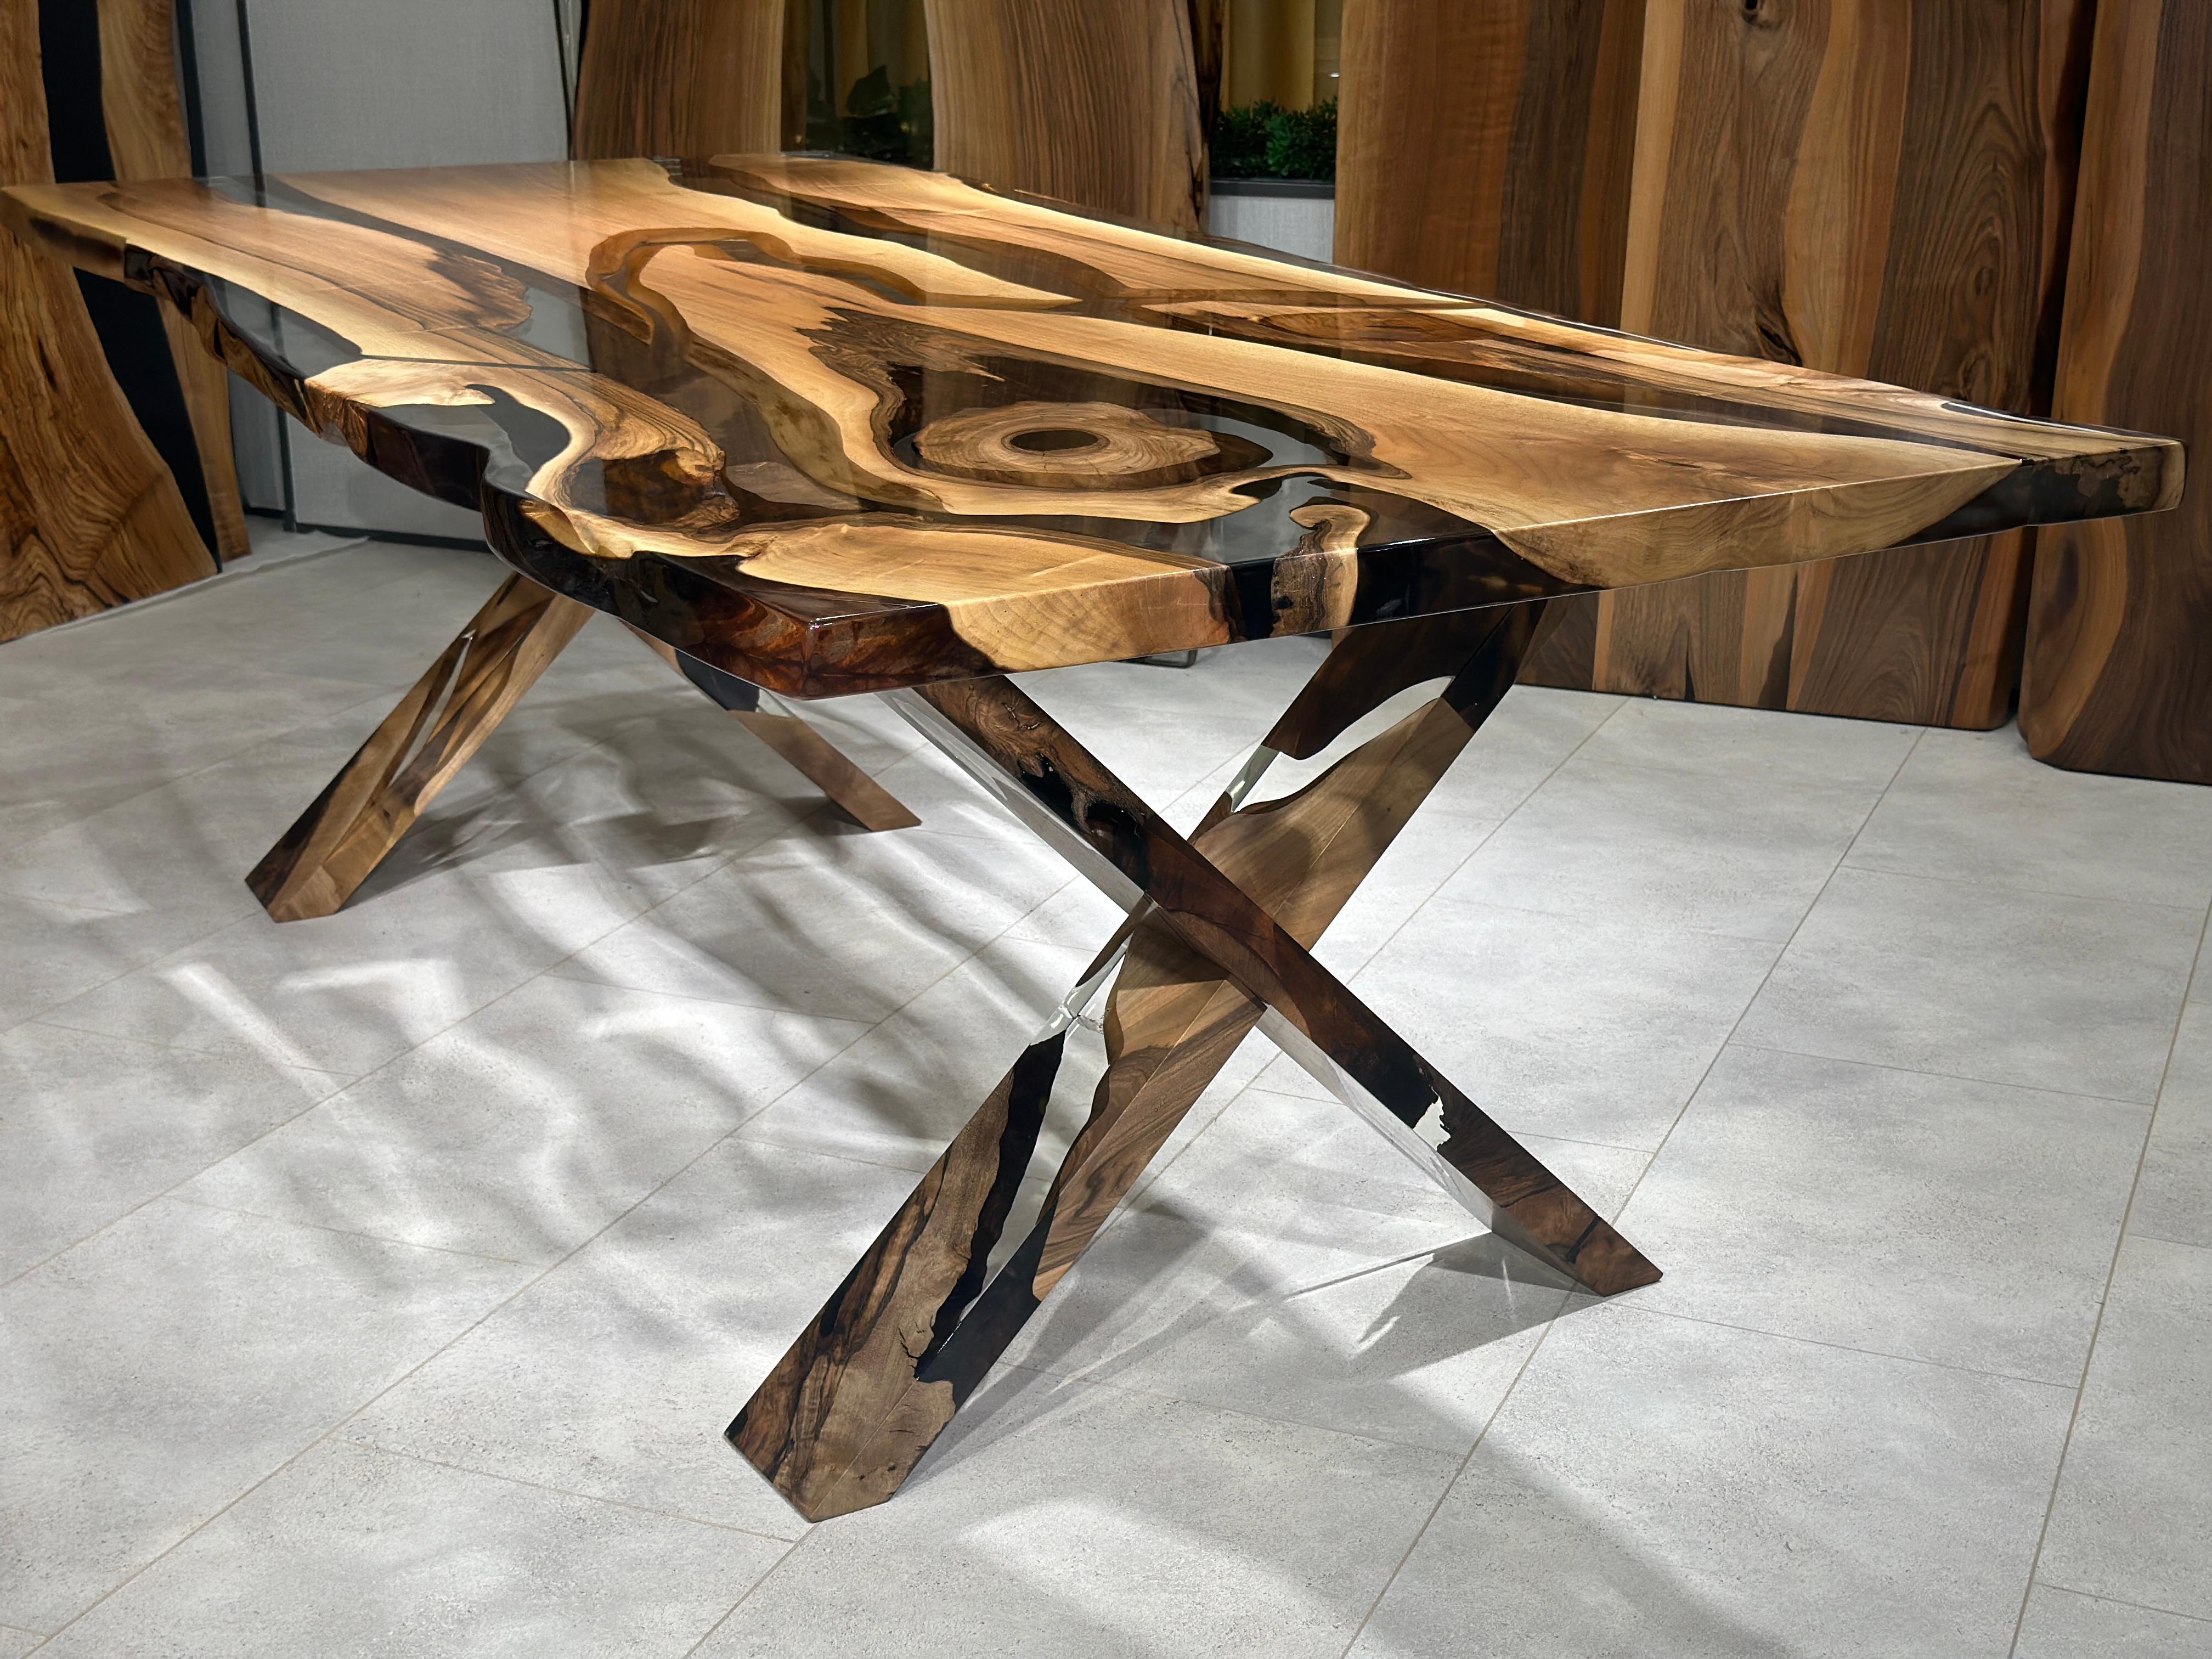 Black Walnut Ultra Clear Epoxy Resin Dining Table 

This table is made of 500 years old Walnut Wood. The grains and texture of the wood describe what a natural walnut woods looks like.
It can be used as a dining table or as a conference table.